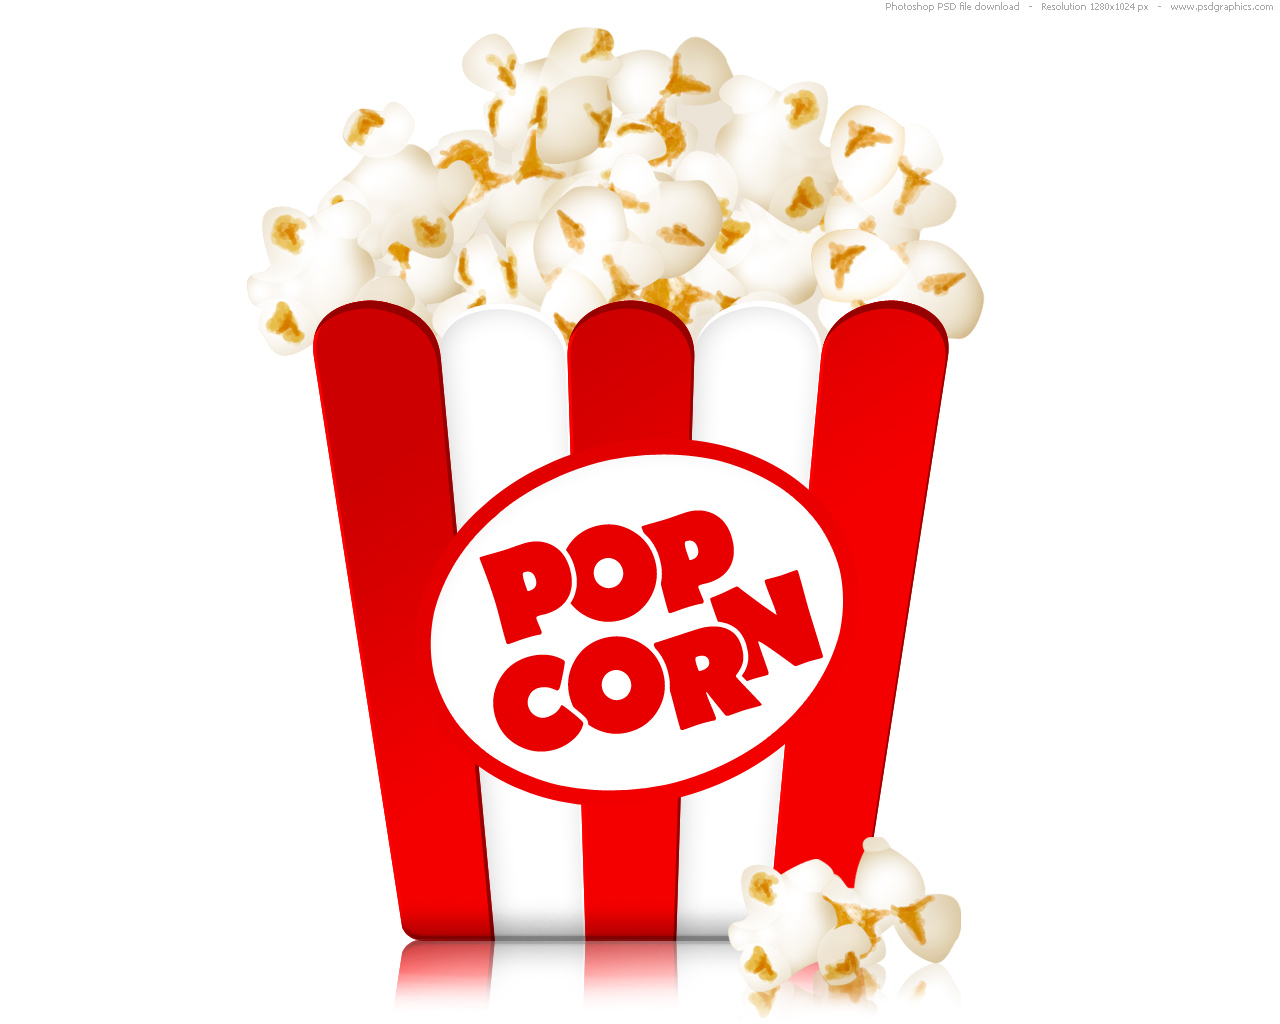 I'm going to get straight to the point here. Microwave popcorn! This stuff is sooooooo bad for you. Not only is is high in calories, butters and grease, ...